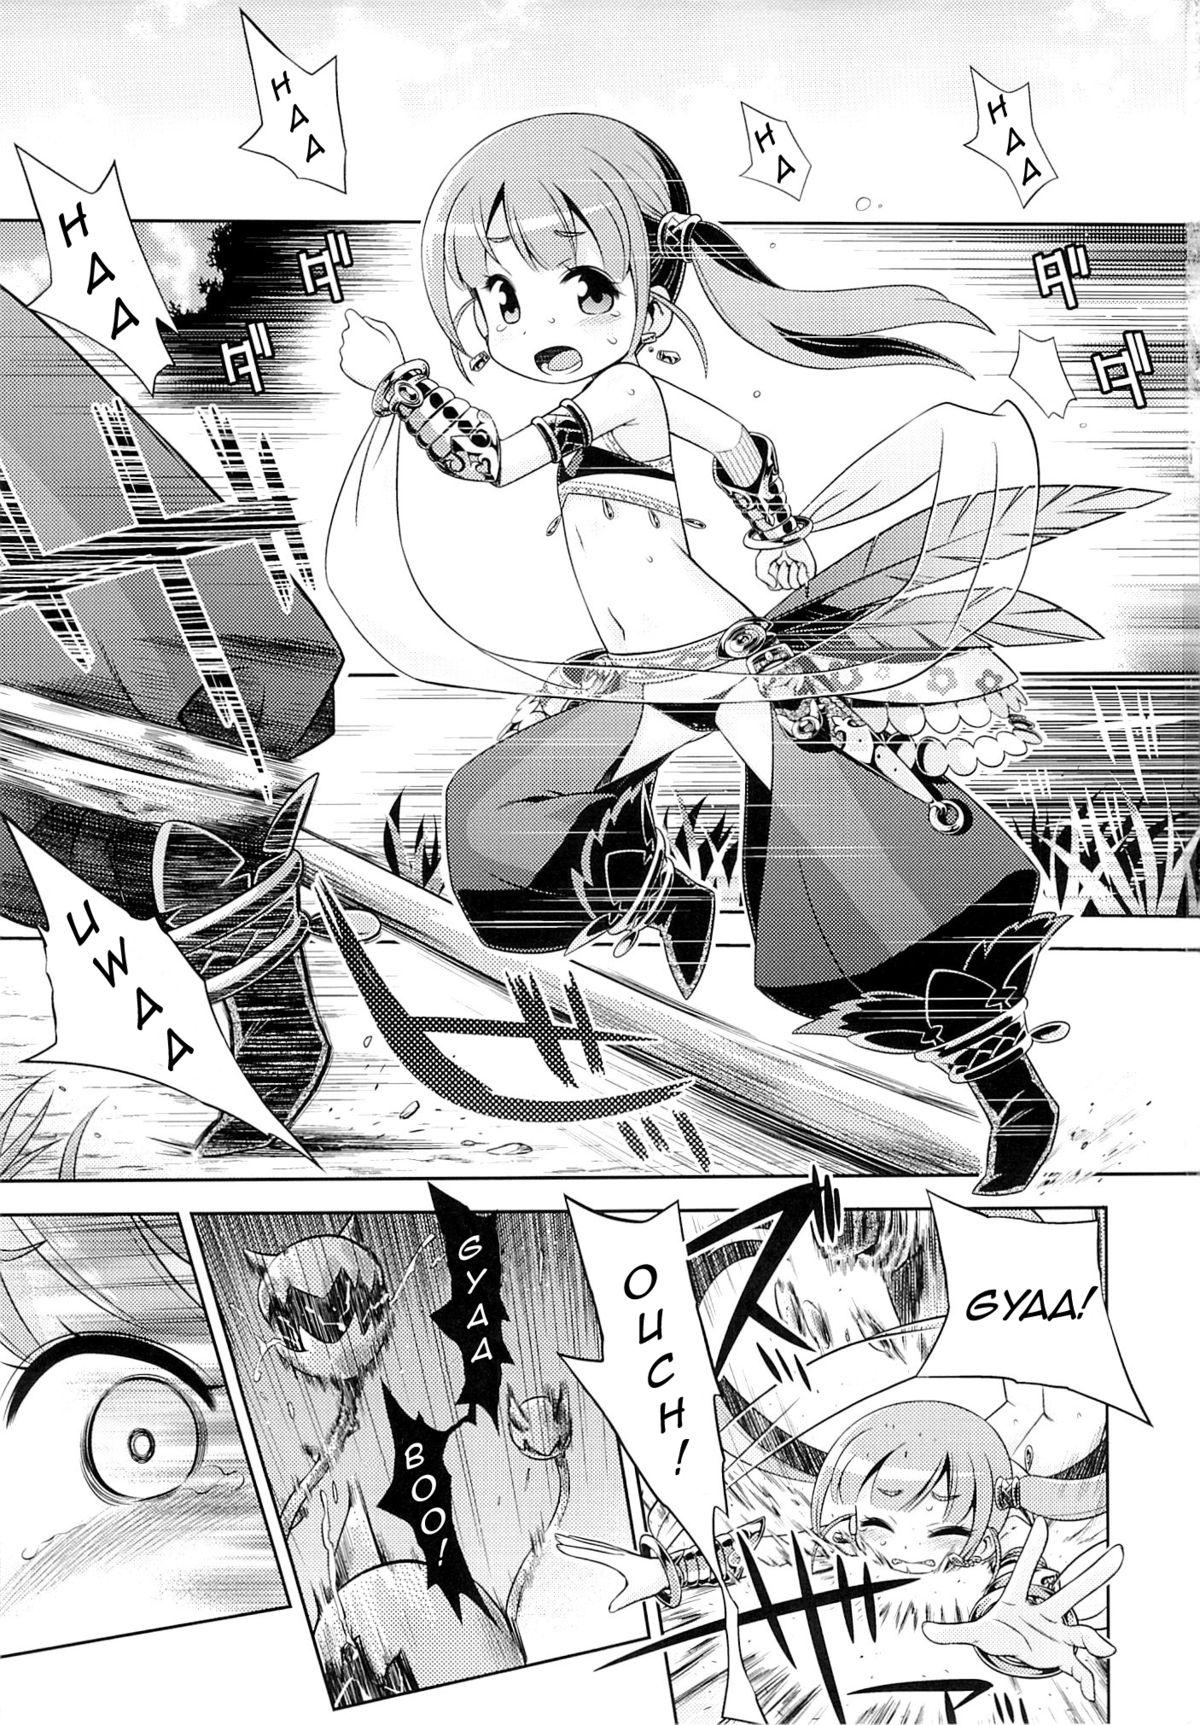 Young Tits Sekaiju no Anone 24 - Etrian odyssey 3some - Page 2